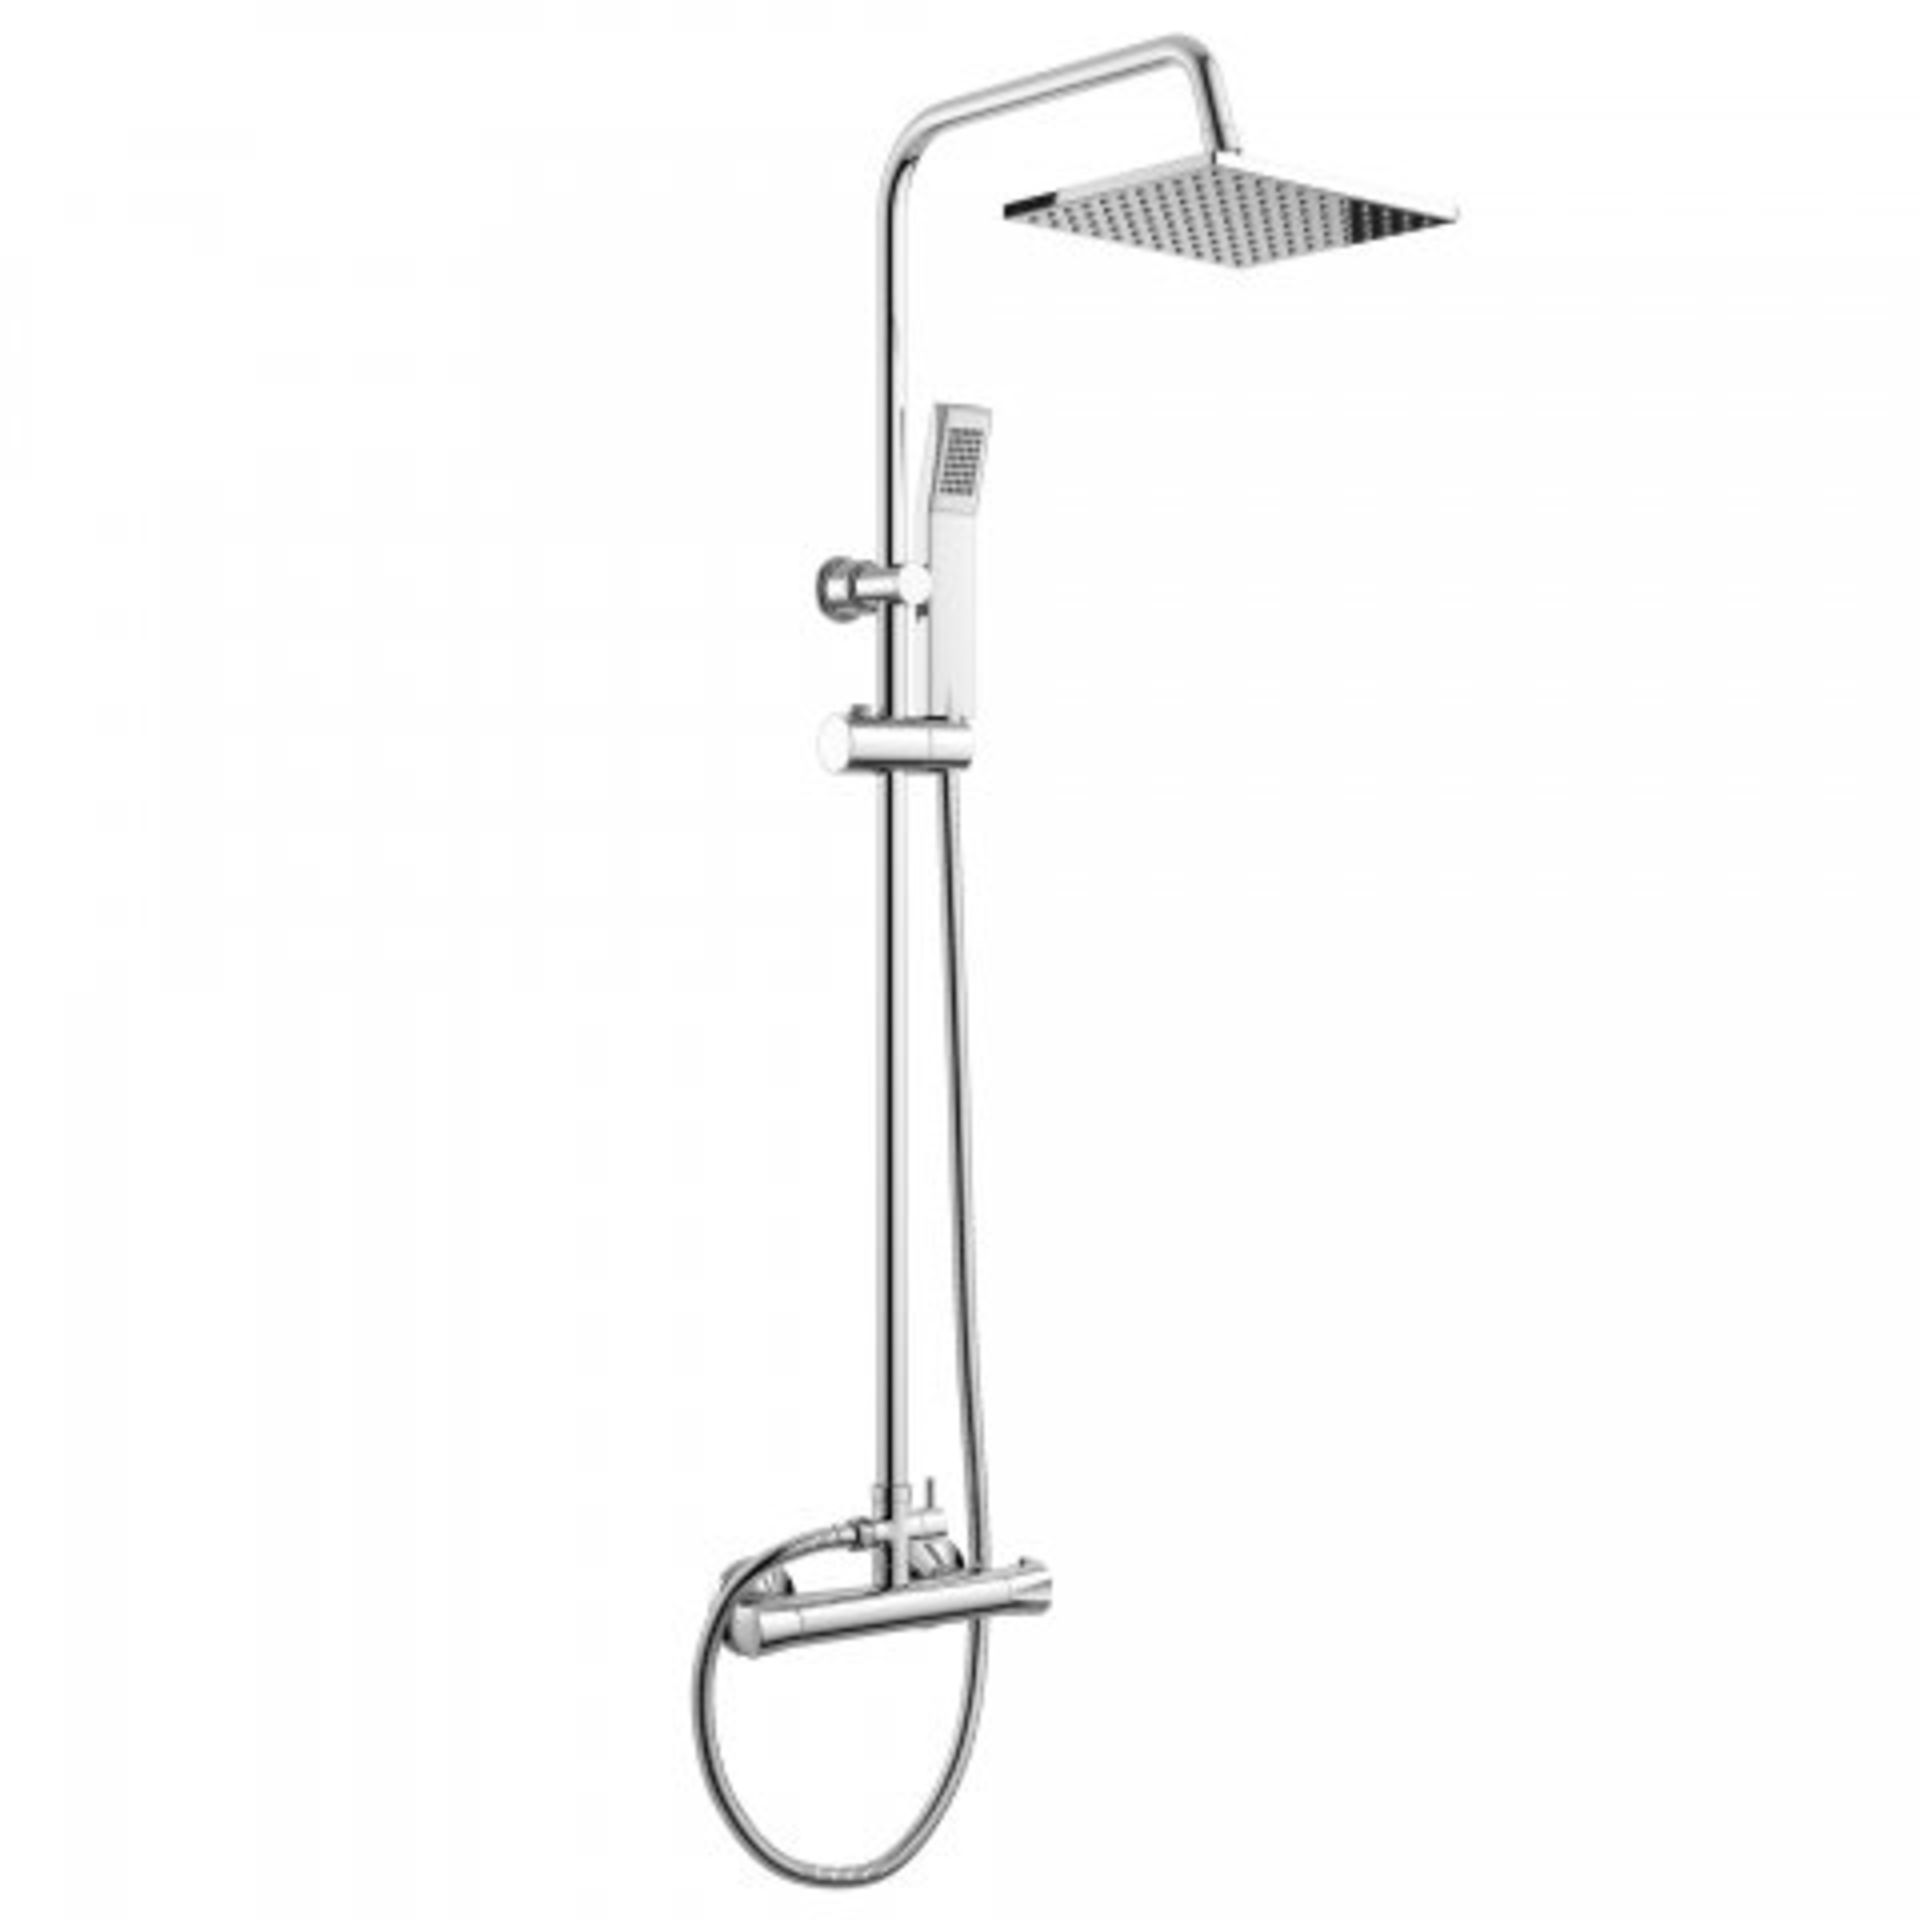 (N17) 200mm Square Head Thermostatic Exposed Shower Kit & Hand Held. RRP £299.99. Simplistic Style - Image 3 of 5